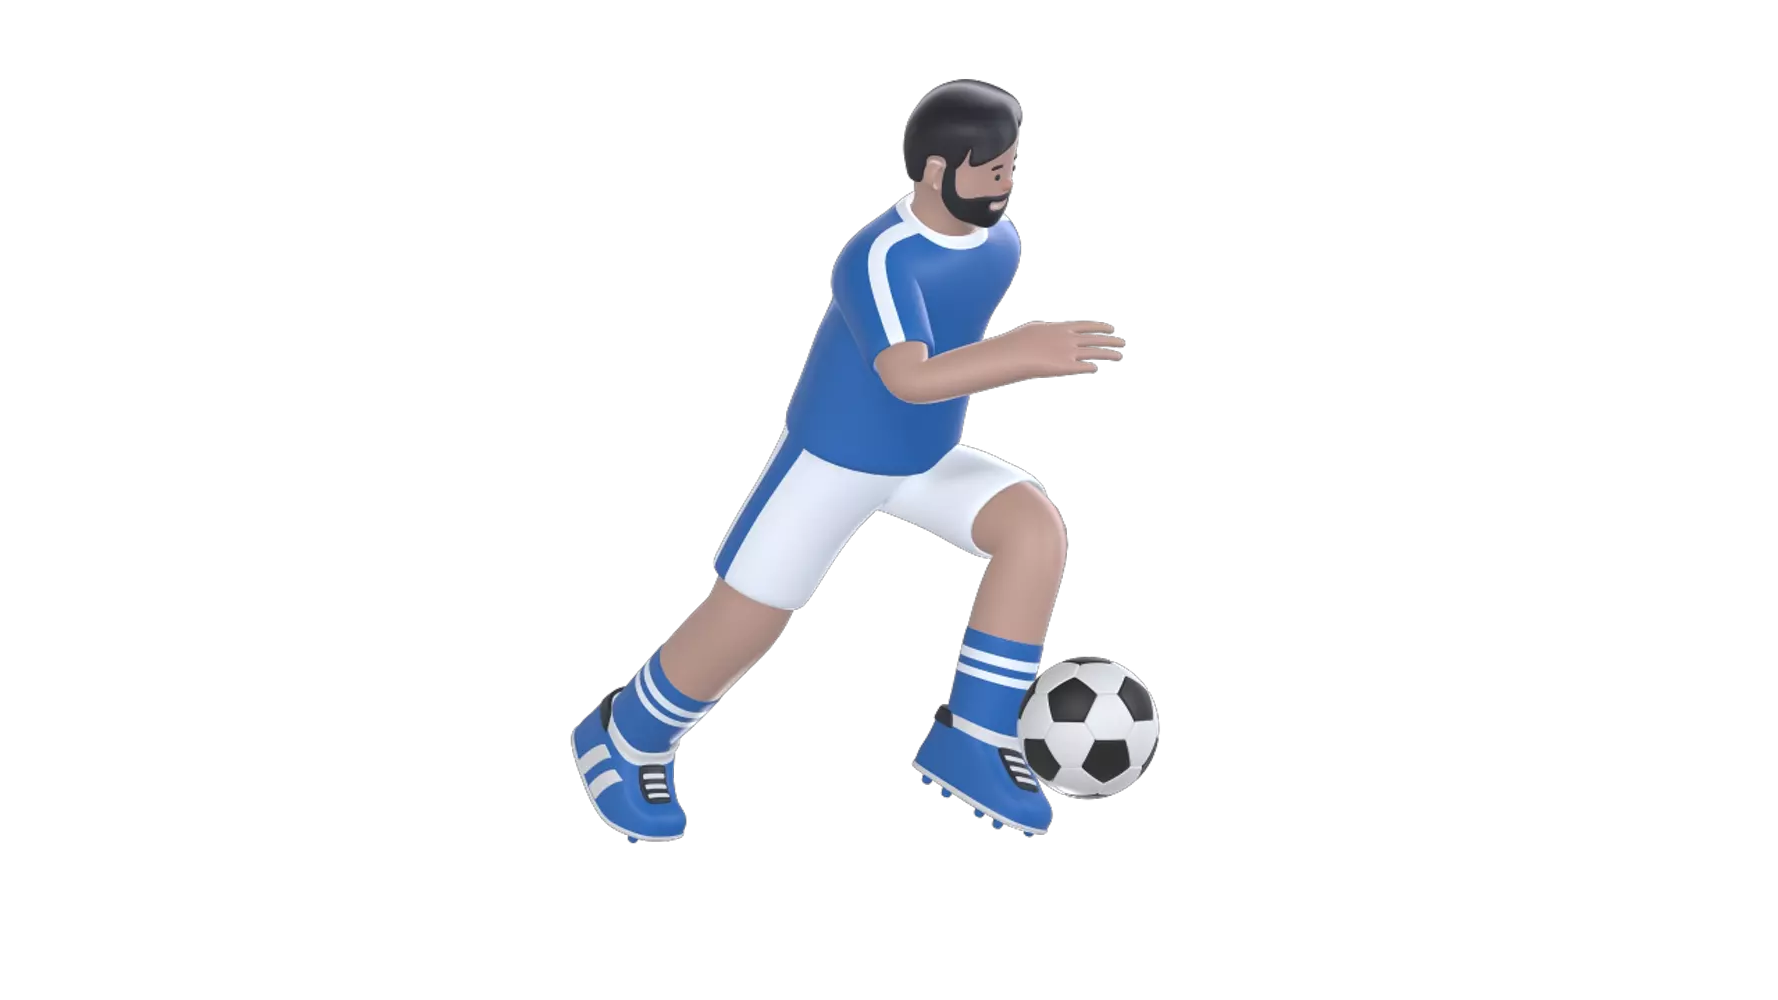 Soccer Player Running 3D Graphic